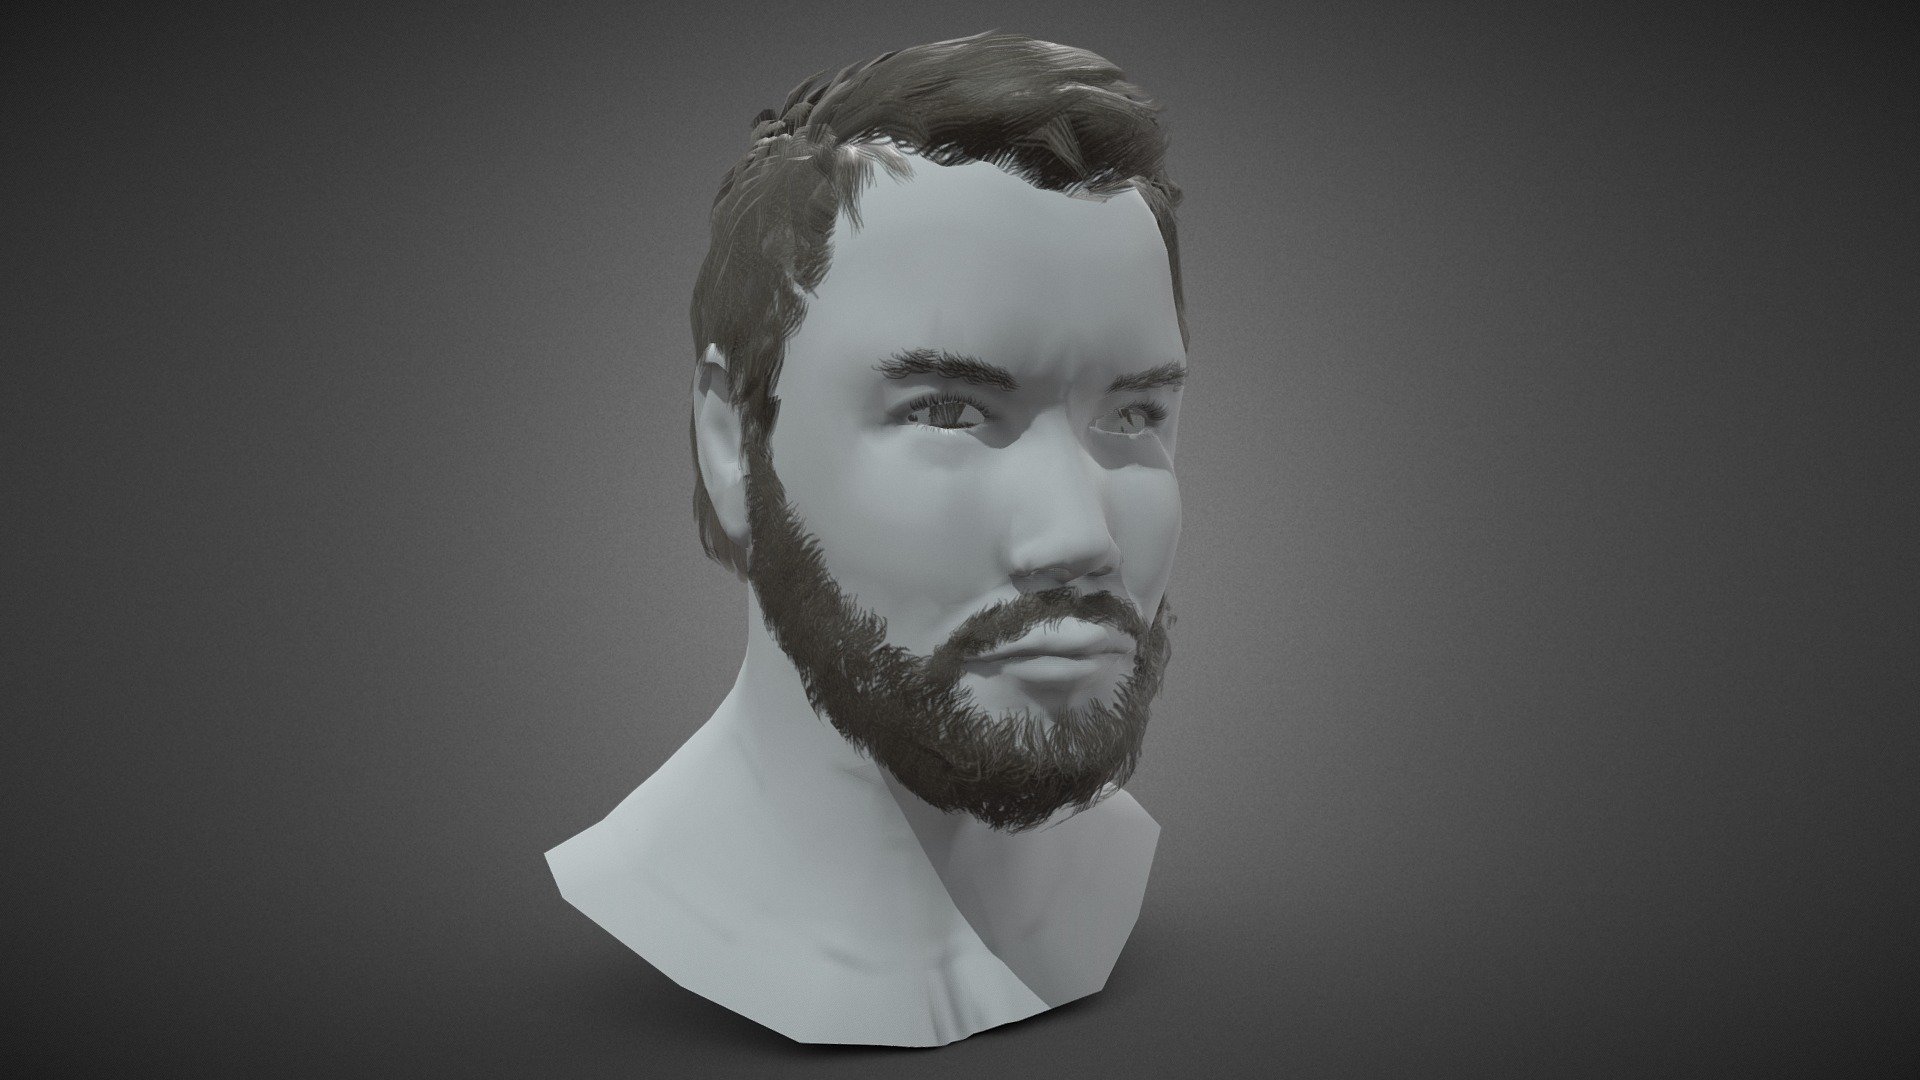 CG StudioX Present :
Hair and Beard Cards Man lowpoly/PBR


This is Hair and Beard Cards Man Comes with Specular and Metalness PBR.
The photo been rendered using Marmoset Toolbag 3 (real time game engine )

Features :

Comes with Specular and Metalness PBR 4K texture .
Good topology.
Low polygon geometry.
The Model is prefect for game for both Specular workflow as in Unity and Metalness as in Unreal engine .
The model also rendered using Marmoset Toolbag 3 with both Specular and Metalness PBR and also included in the product with the full texture.
The product has ID map in every part for changing any part in the model .
The texture can be easily adjustable .

Texture :

ALL Texture [Albedo -Normal-Metalness -Roughness-Gloss-Specular] (4096*4096)
Two objects (Hair-Eyelash) each one has it own uv set and textures.

Files :
Marmoset Toolbag 3 ,Maya,,FBX,OBj with all the textures.


Contact me for if you have any questions.
 - Hair and Beard Cards Man - Buy Royalty Free 3D model by CG StudioX (@CG_StudioX) 3d model